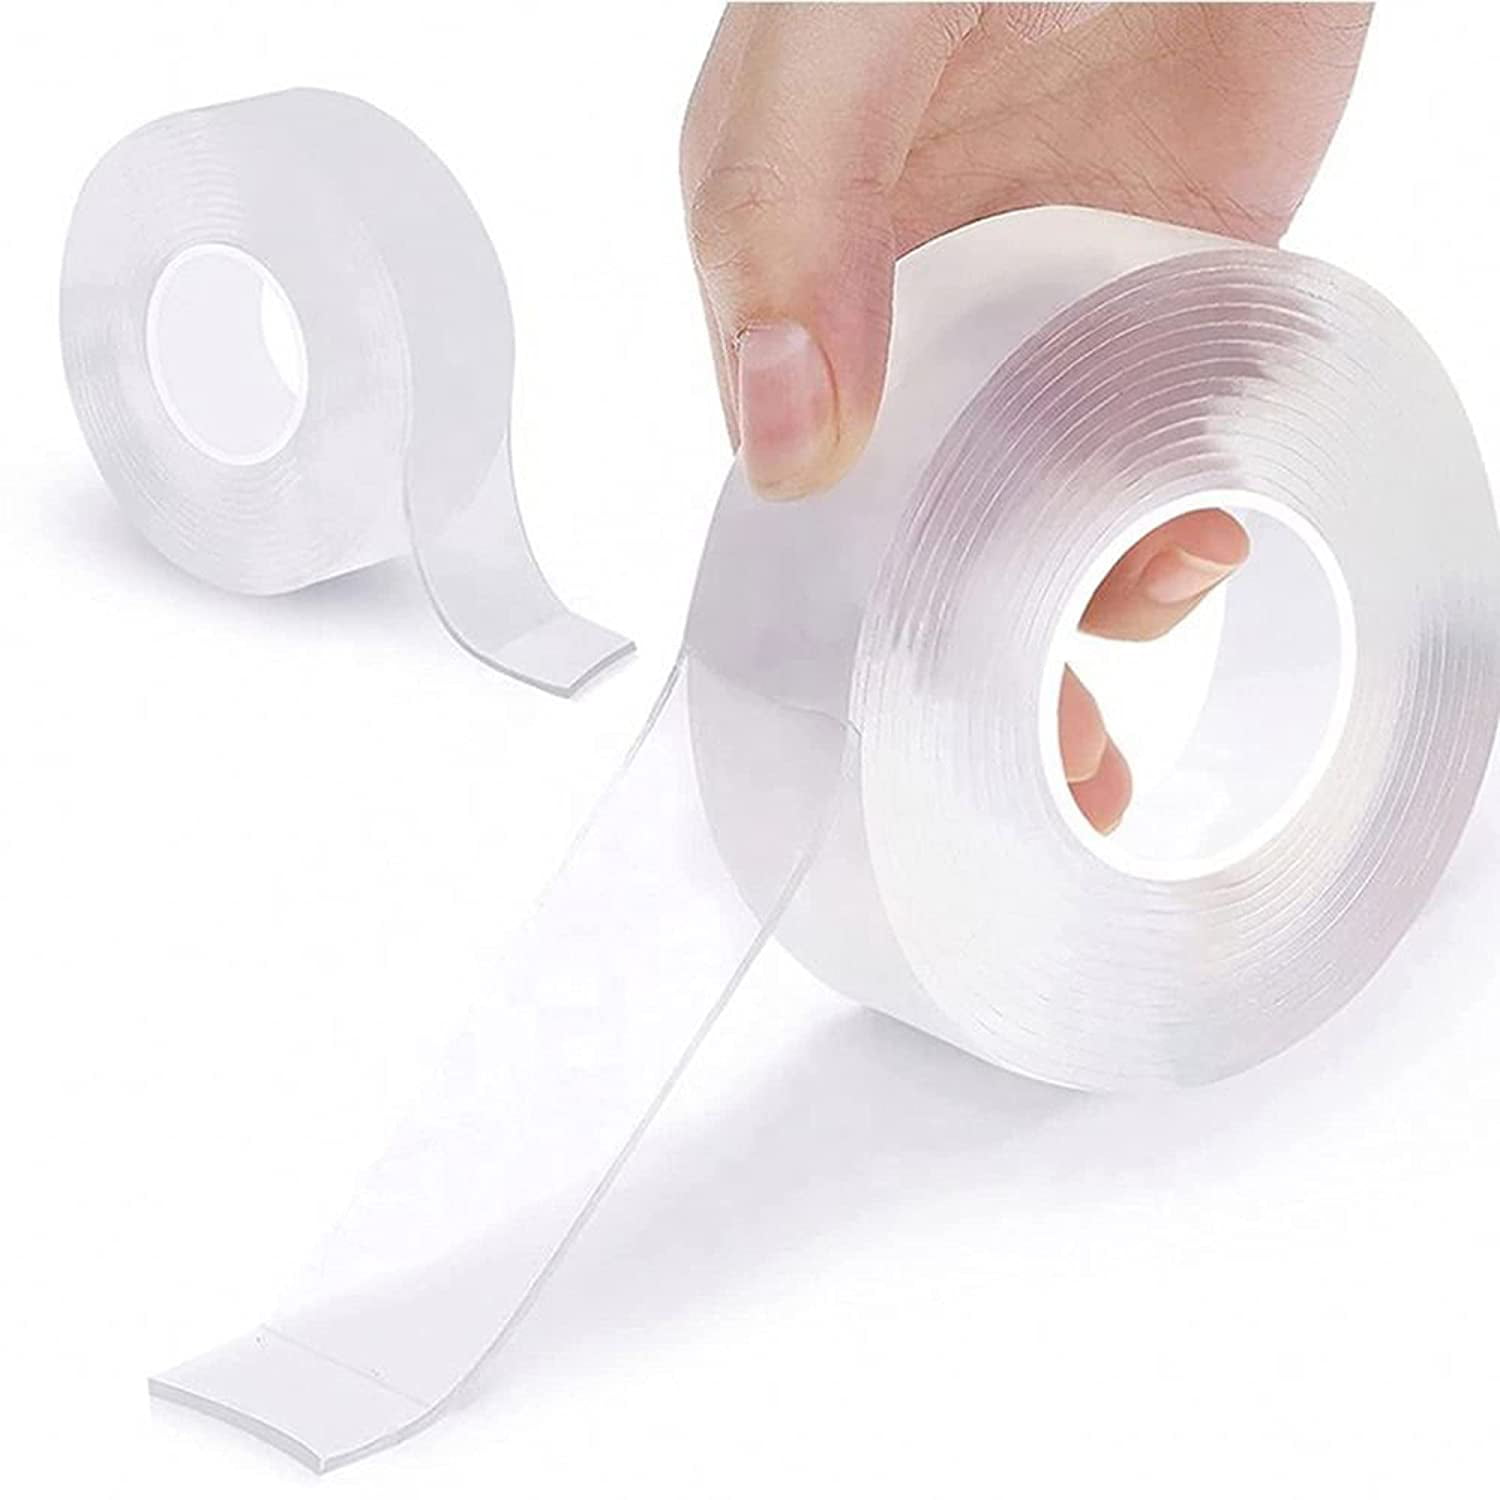 ZMUAXUAN Nano Tape Clear Double Sided Adhesive Mounting Tape Heavy